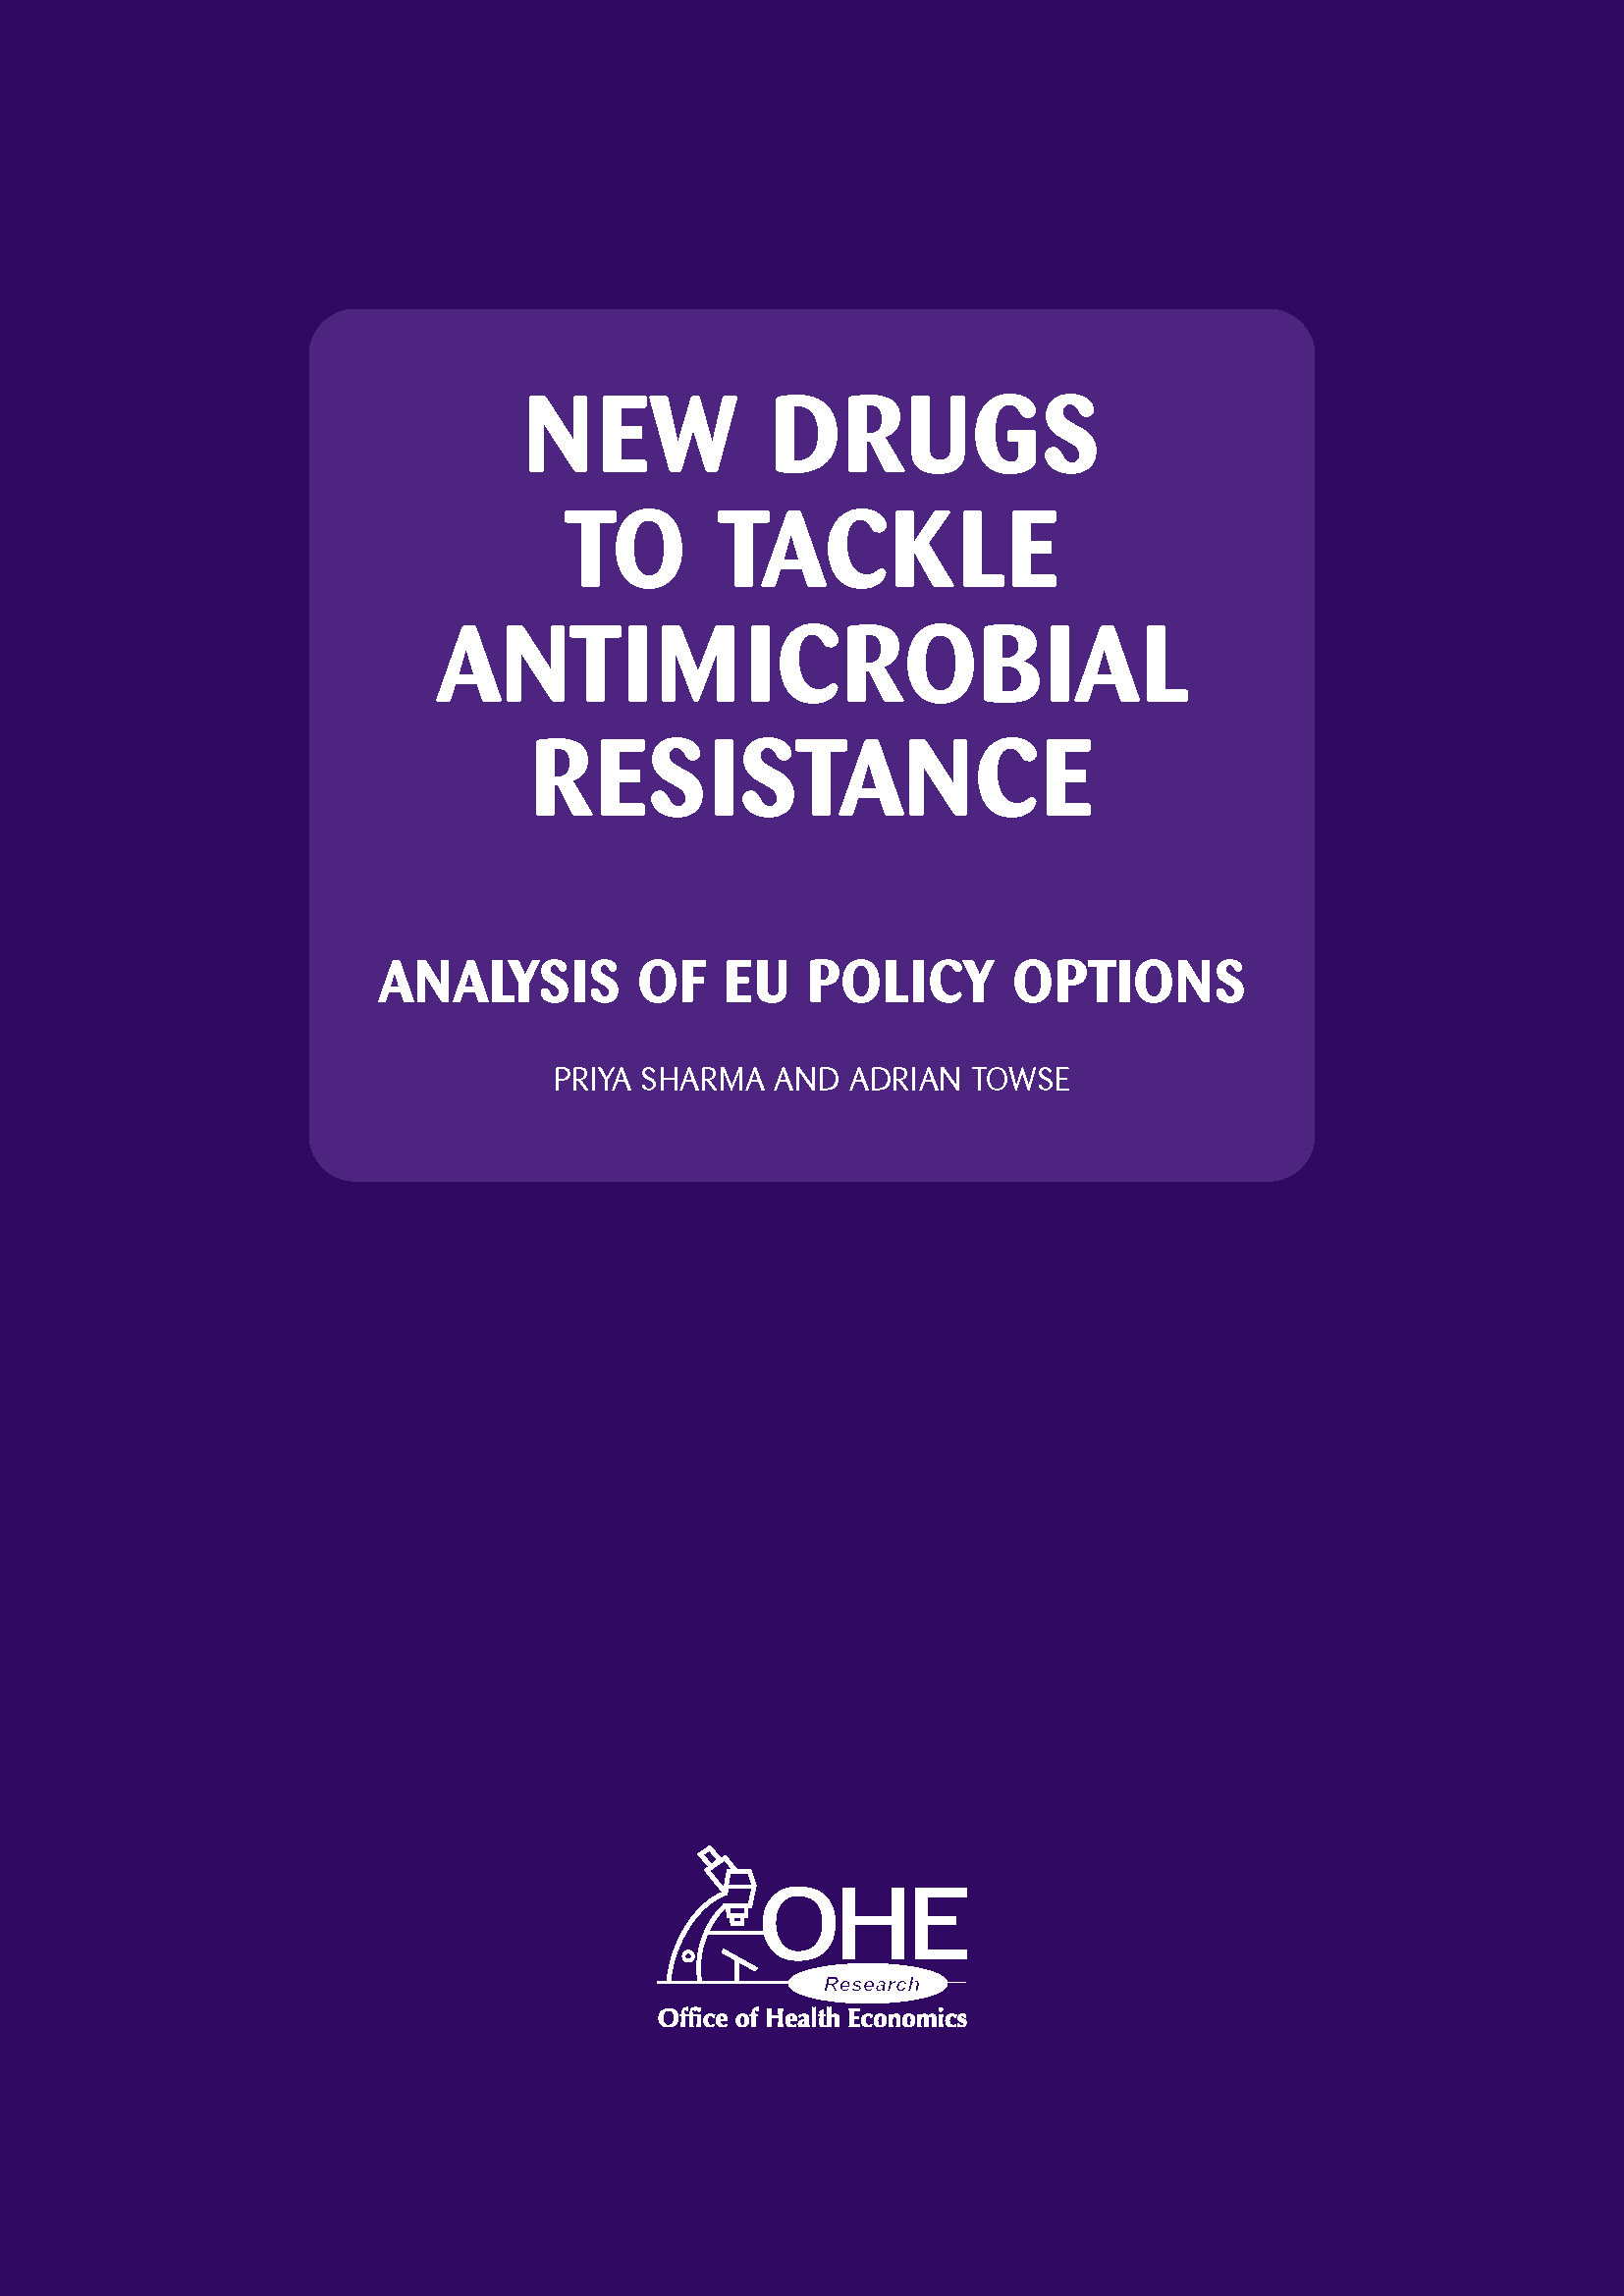 New Drugs to Tackle Antimicrobial Resistance: Analysis of EU Policy Options